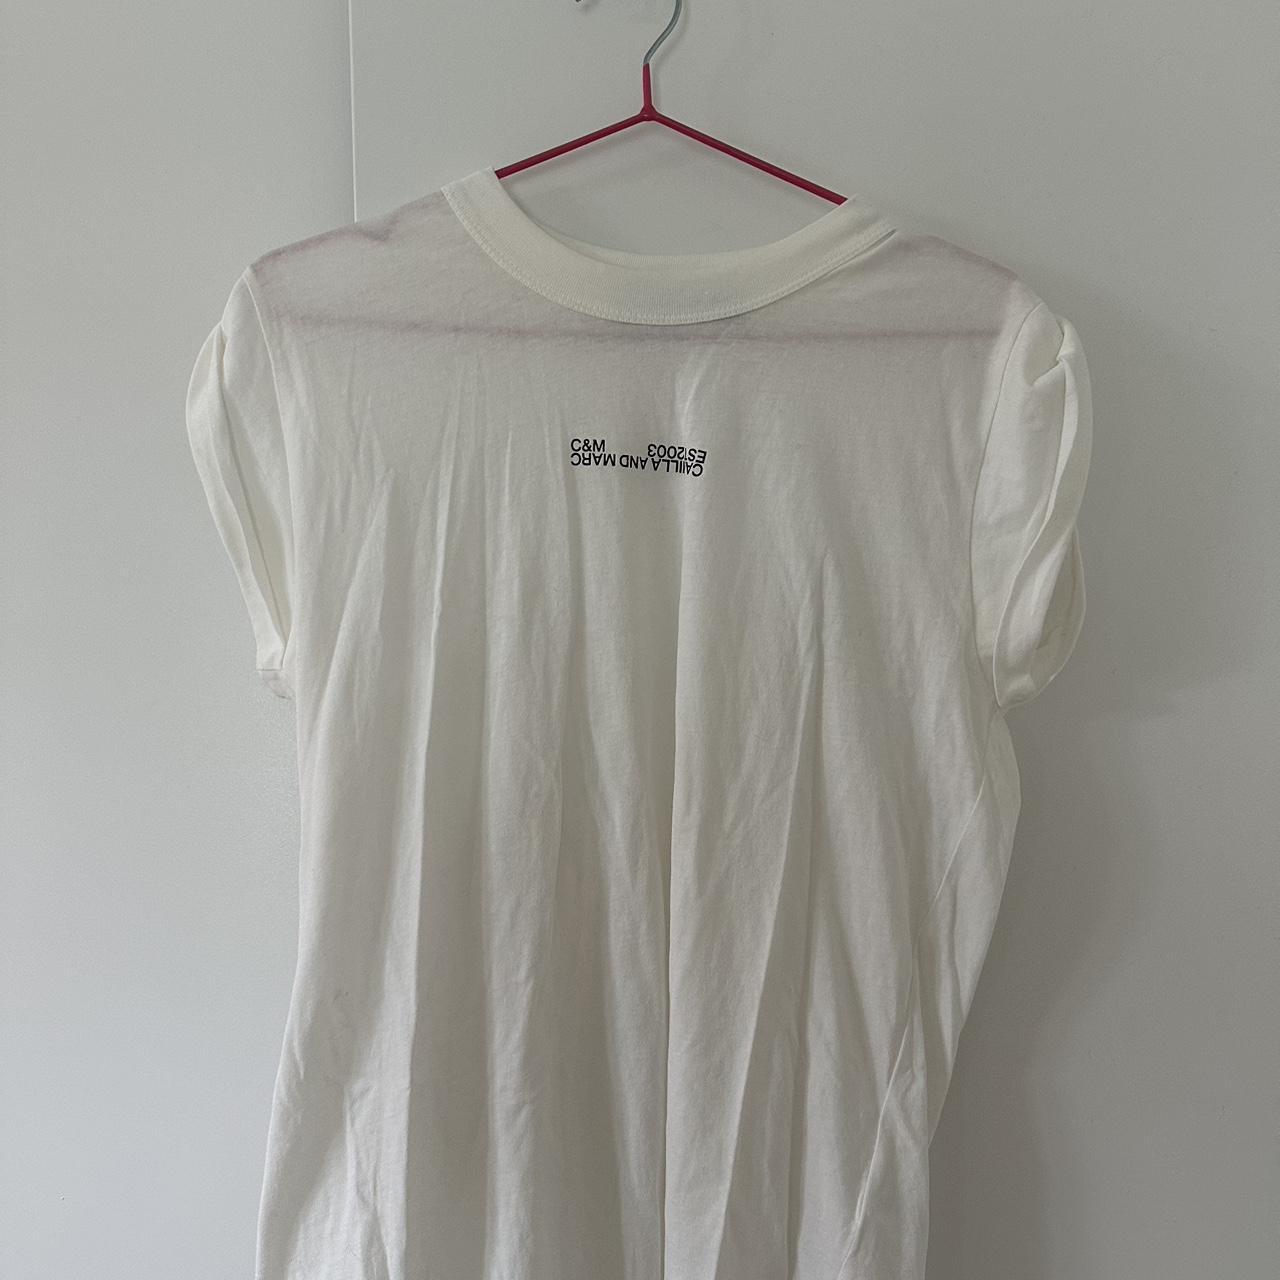 Camila and Marc white t shirt never worn - Depop